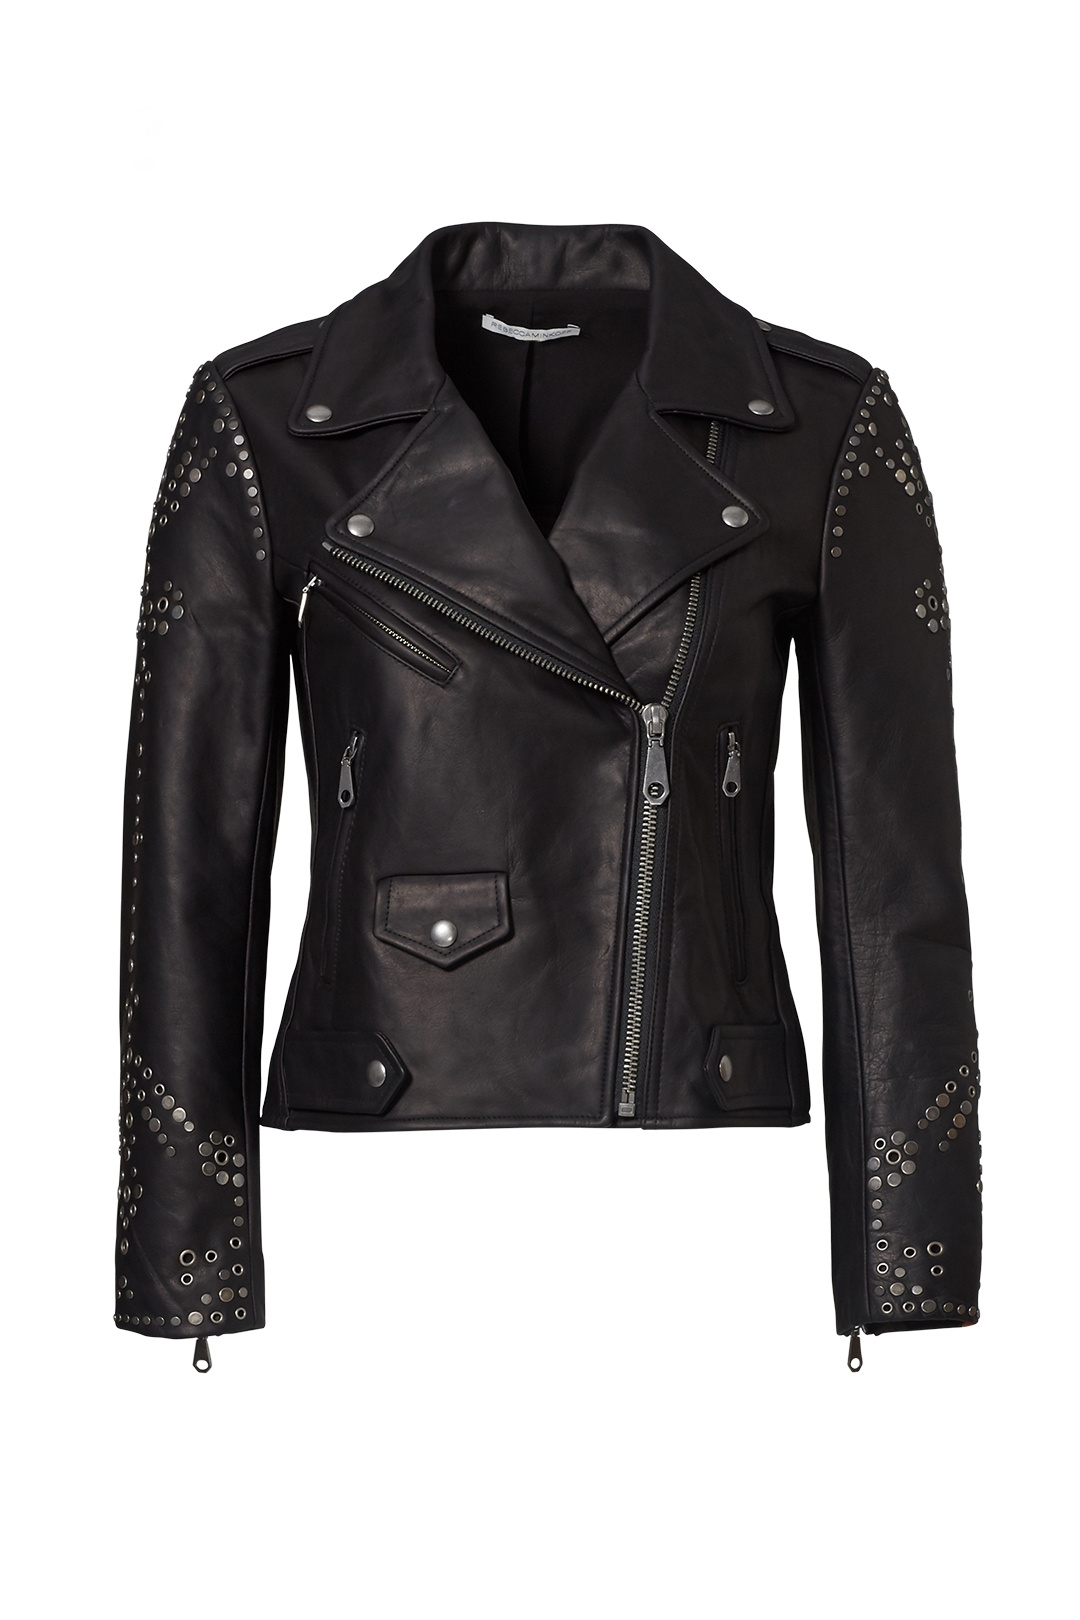 Rebecca Minkoff Studded Leather Jacket from Rent the Runway